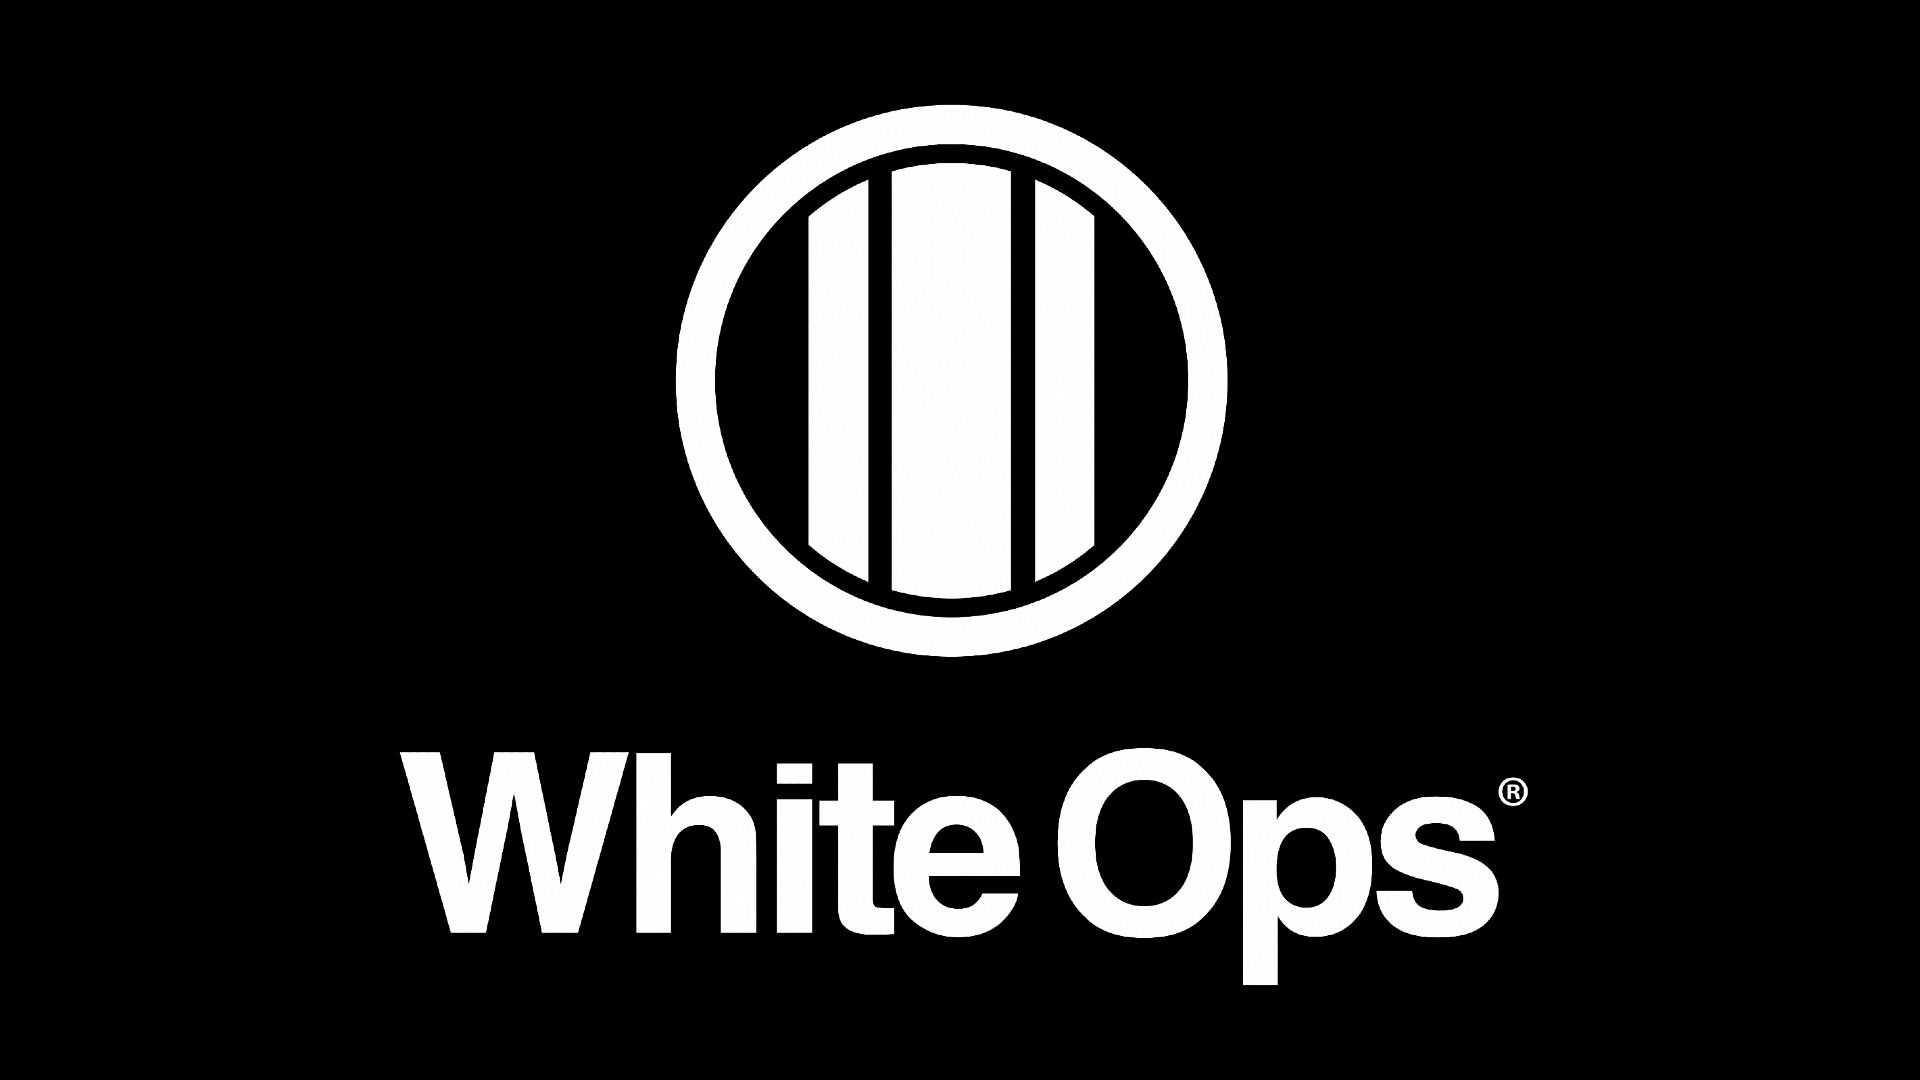 Goldman Sachs, ClearSky, and NightDragon acquire White Ops